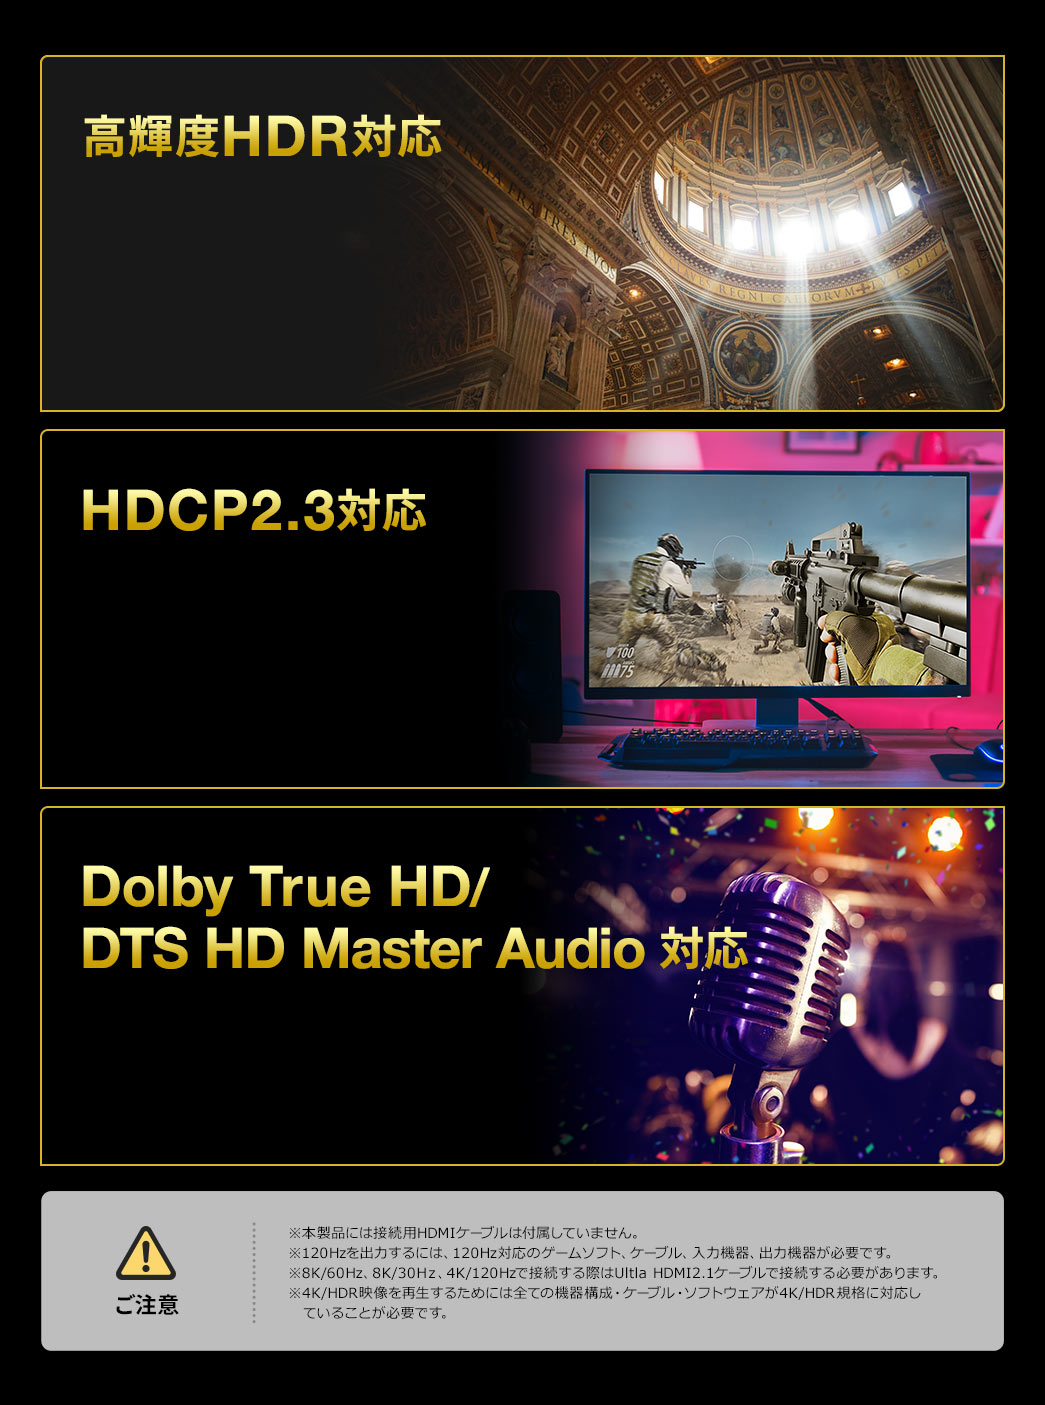 PxHDRΉ HDCP2.3Ή Dolby True HD/DTS HD Master AudioΉ